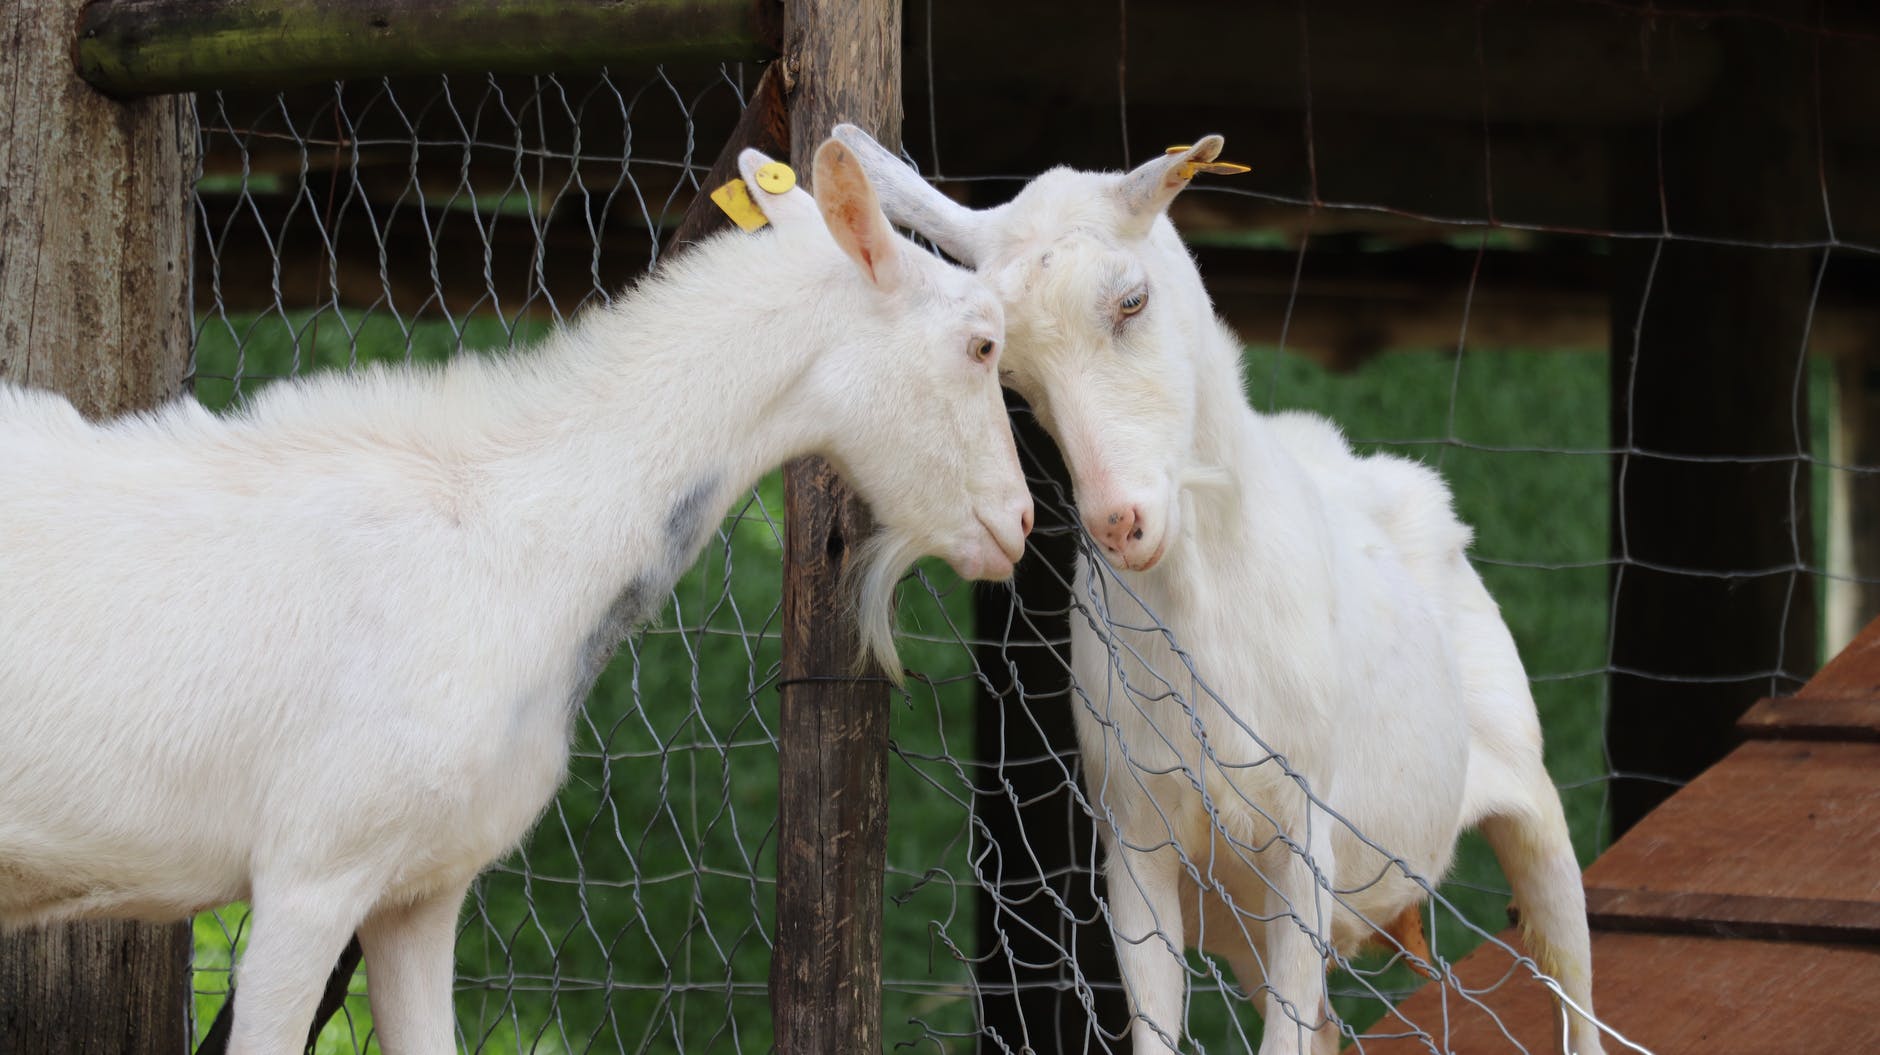 Foods in the bible: goats countryside cute agriculture